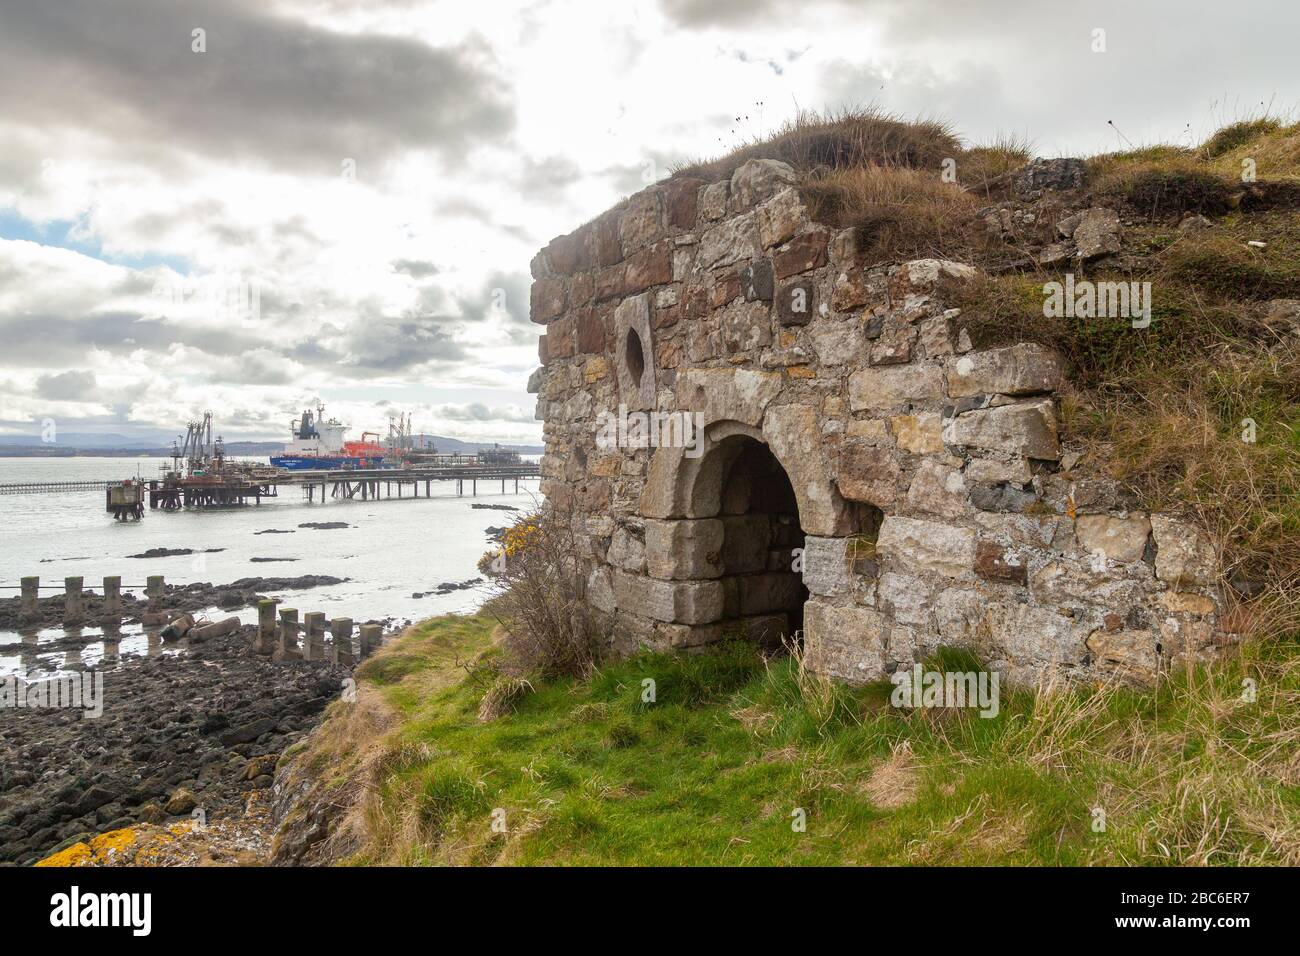 Monk's Cave with Braefoot Oil Terminal in the background, Dalgety Bay, Fife, Scotland. Stock Photo